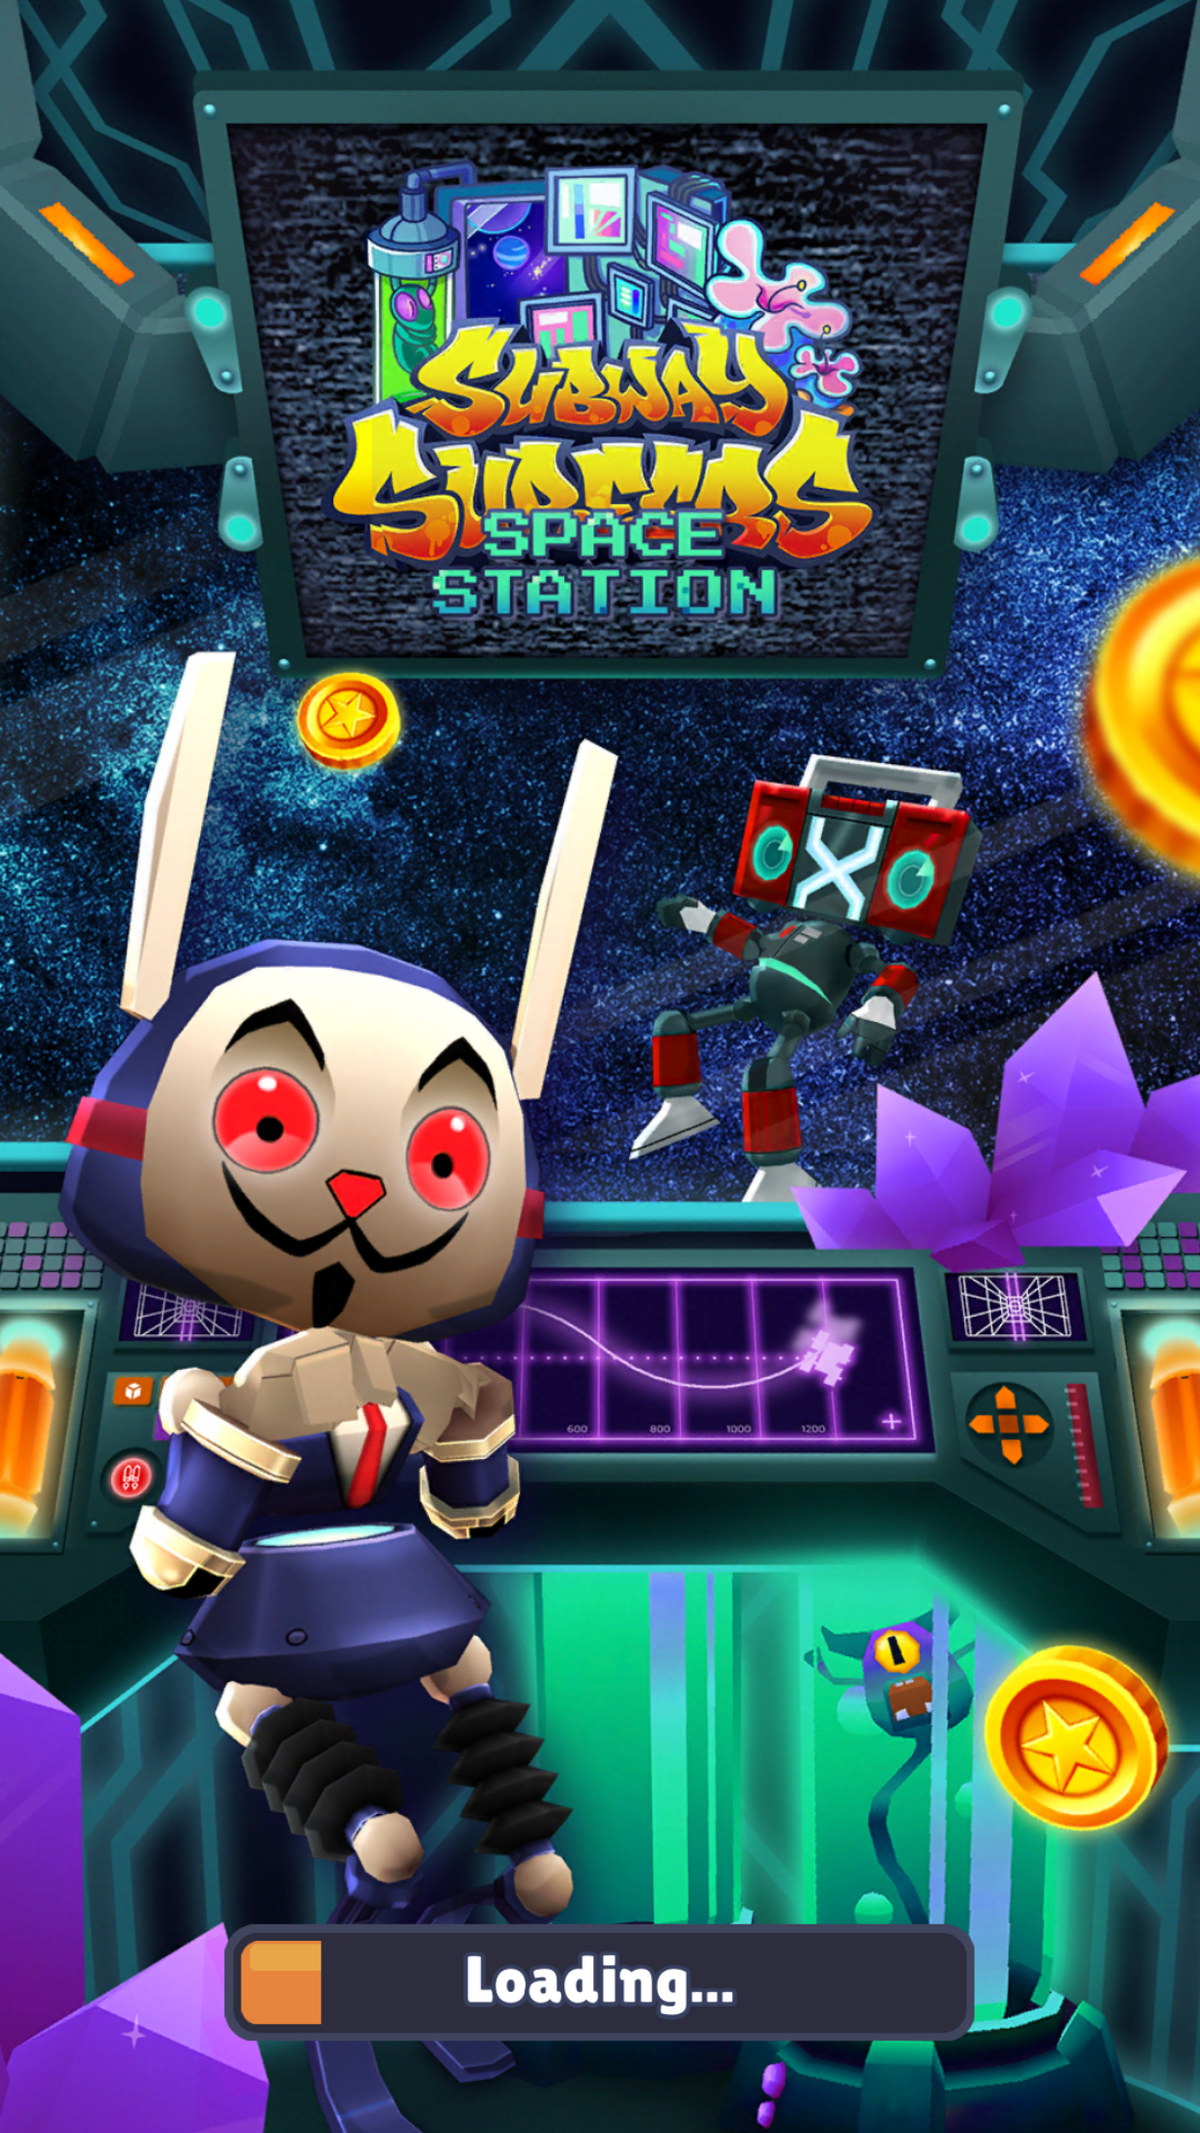 Subway Surfers Space Station 2021 